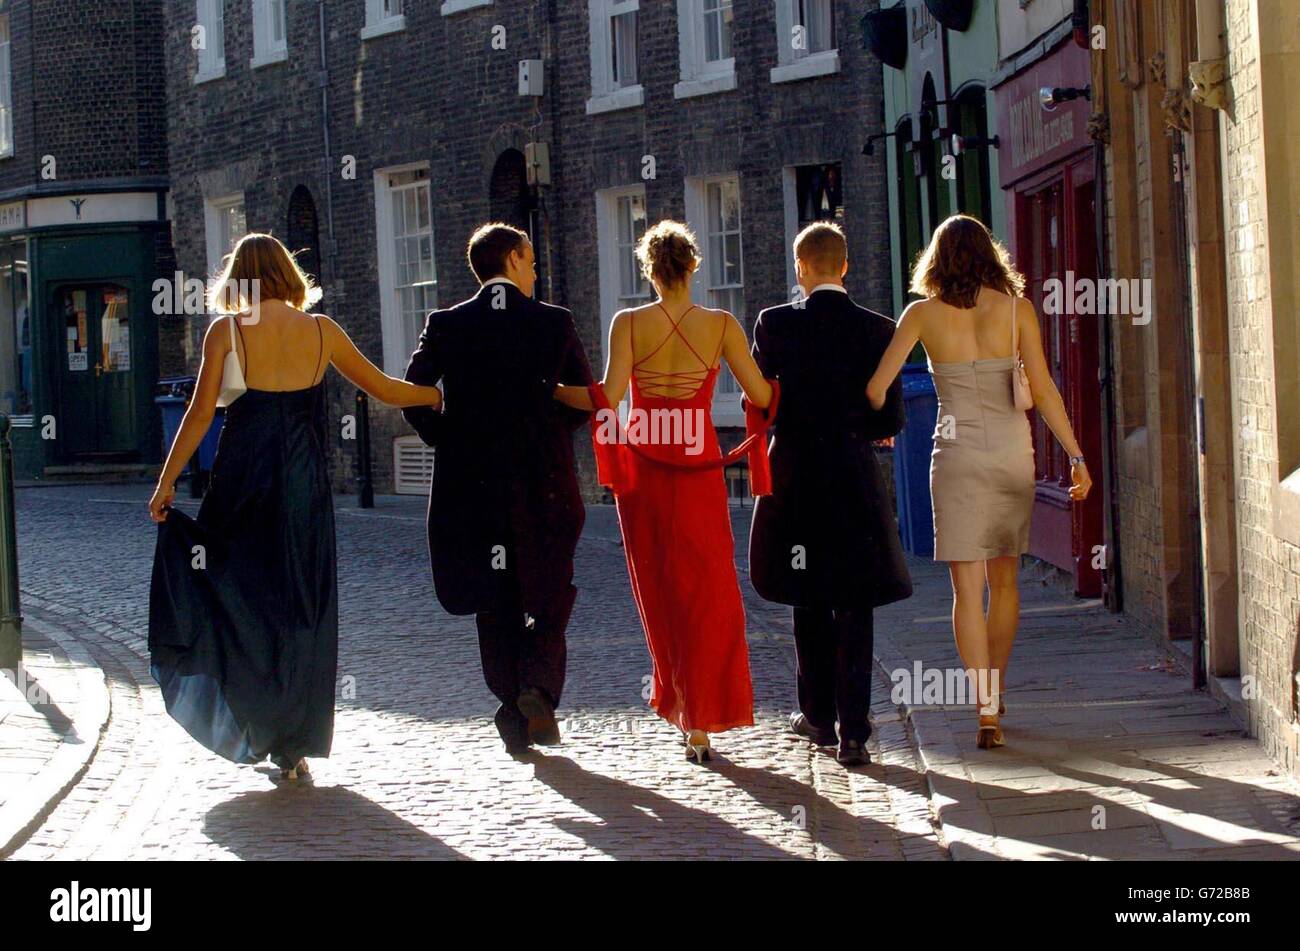 Cambridge University students make their way home through the early morning sunshine, after the end of term May Ball at Trinity College. The college balls, held during May Week - a fortnight in June - are the traditional way for students to let their hair down after taking their end of year exams. Stock Photo